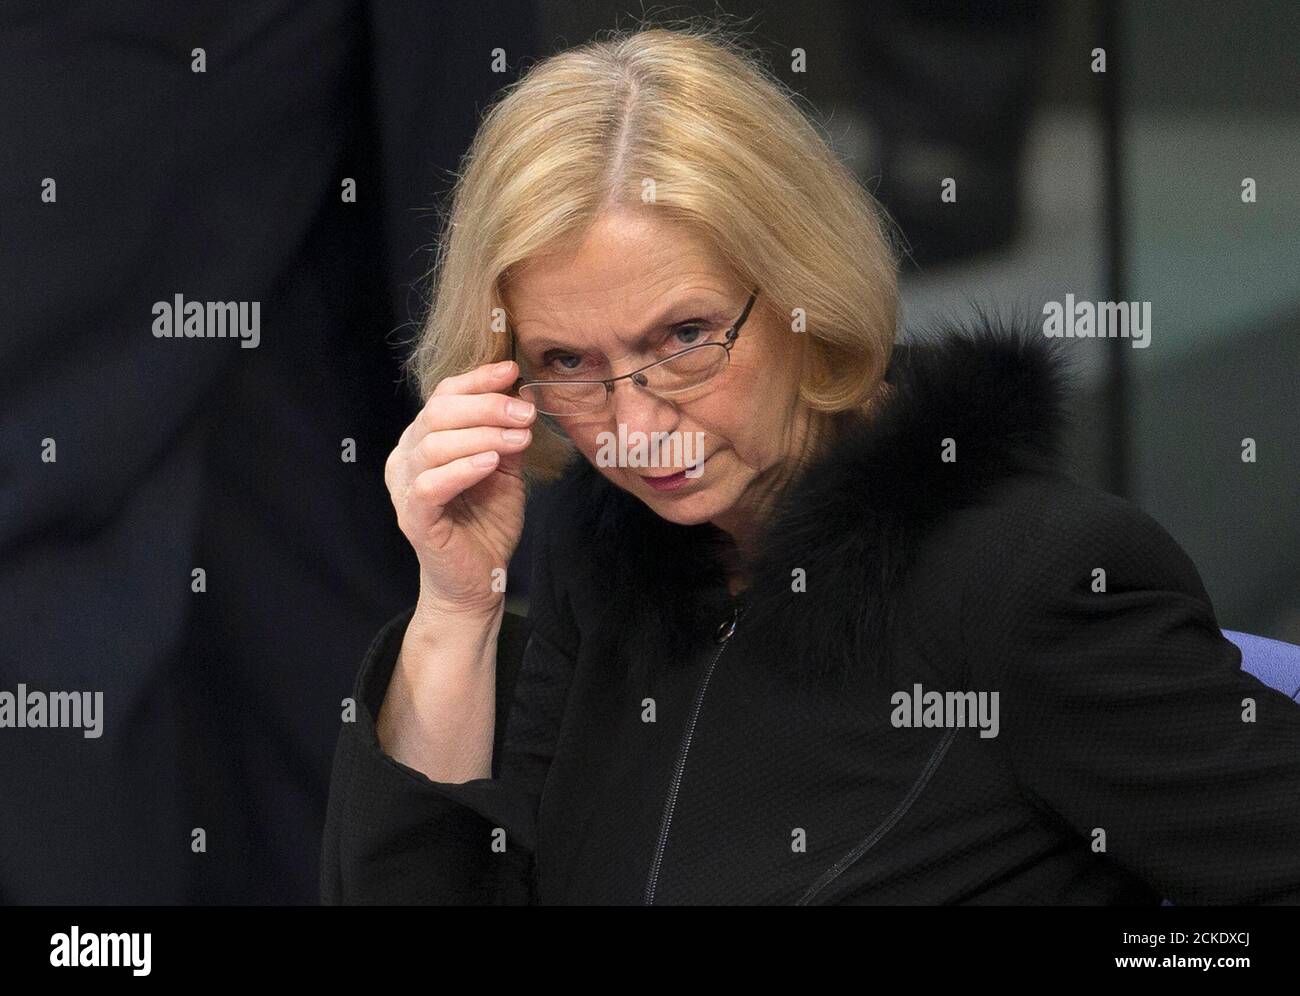 Germany's new Education Minister Johanna Wanka attends a session of the Bundestag in Berlin February 21, 2013. REUTERS/Thomas Peter  (GERMANY - Tags: POLITICS EDUCATION) Stock Photo